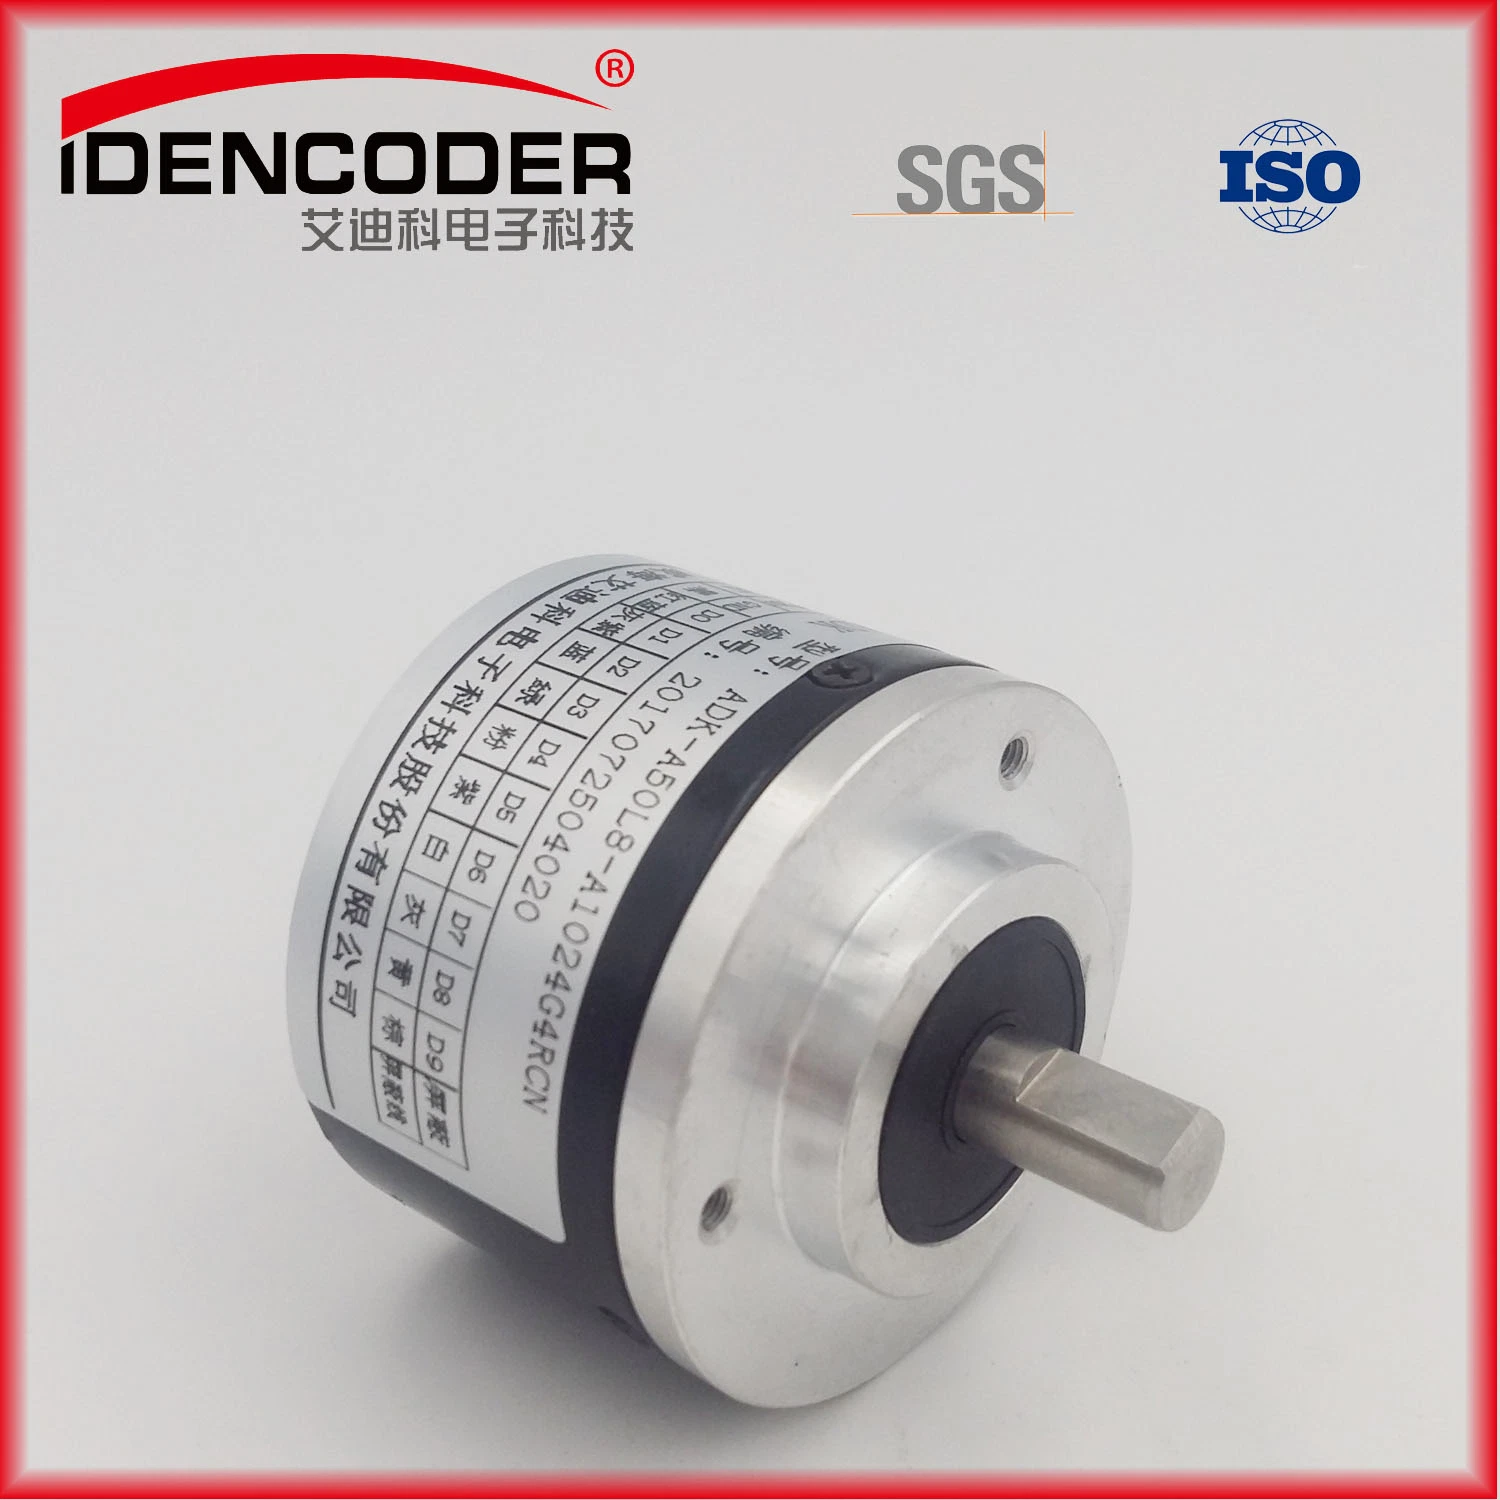 Incremental Universal Encoder Low Cost 1024PPR 2500PPR 4096PPR 5V 8-30VDC Variety Ouput Form Replace Omron E6b2